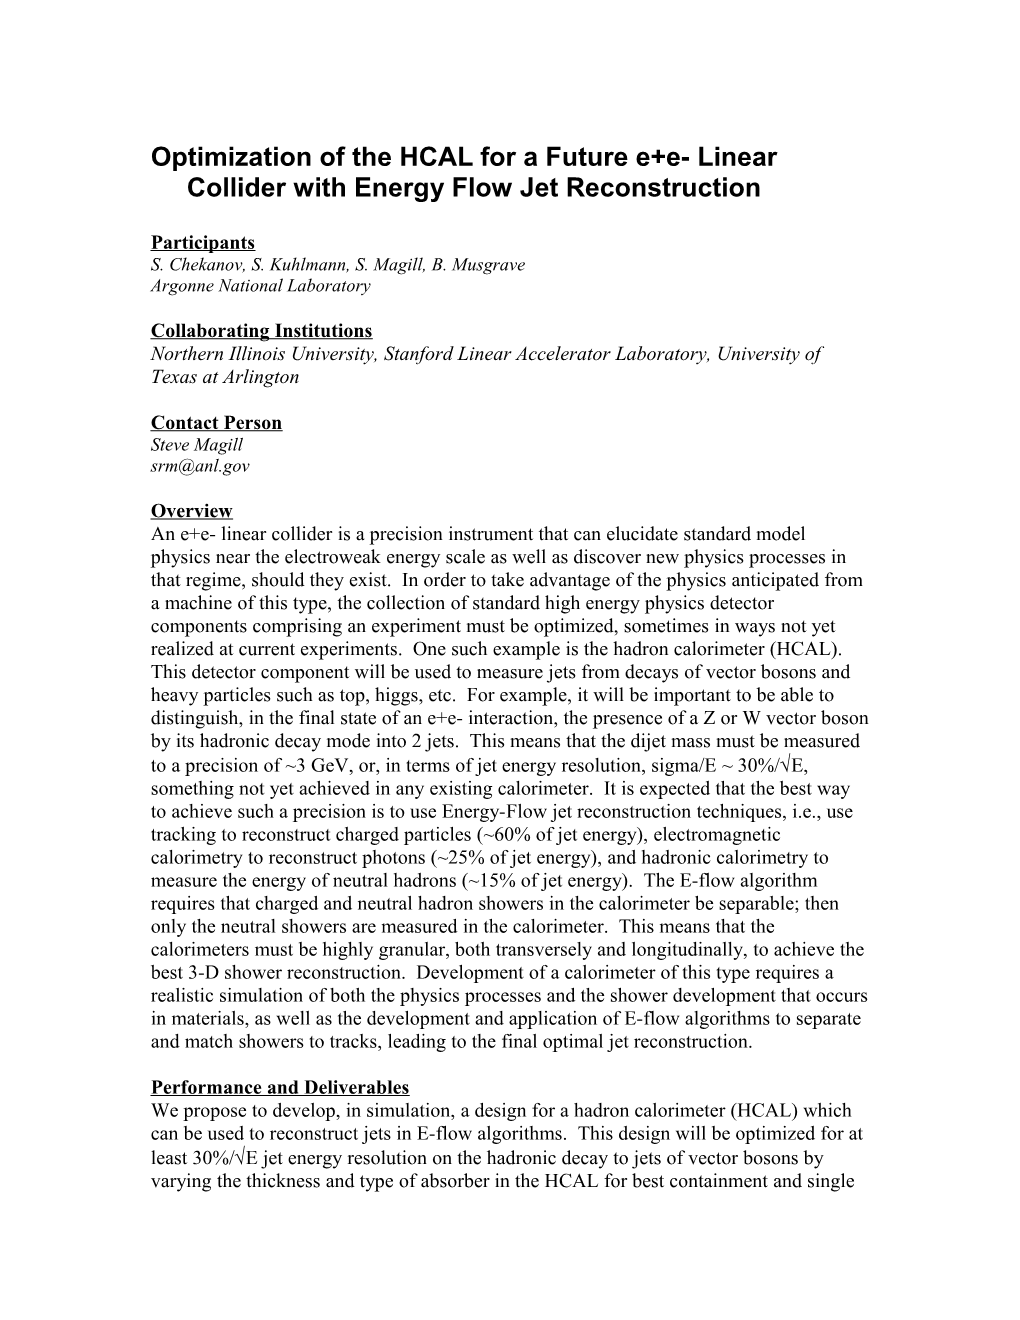 ANL HEP Division Proposed R&D on Linear Collider Calorimetry